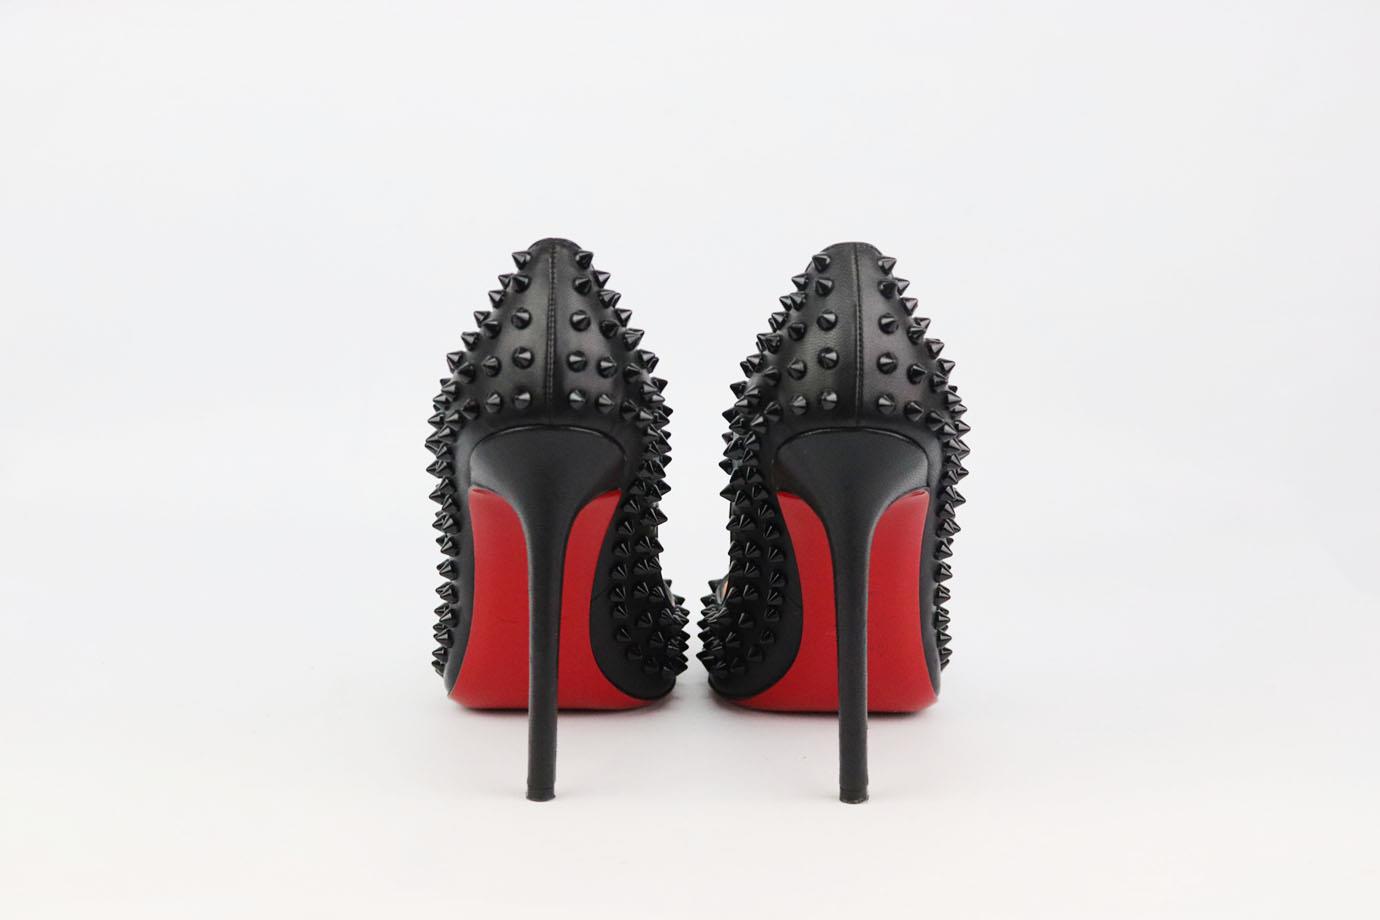 CHRISTIAN LOUBOUTIN PIGALLE SPIKES STUDDED LEATHER PUMPS EU 38.5 UK 5.5 US 8.5